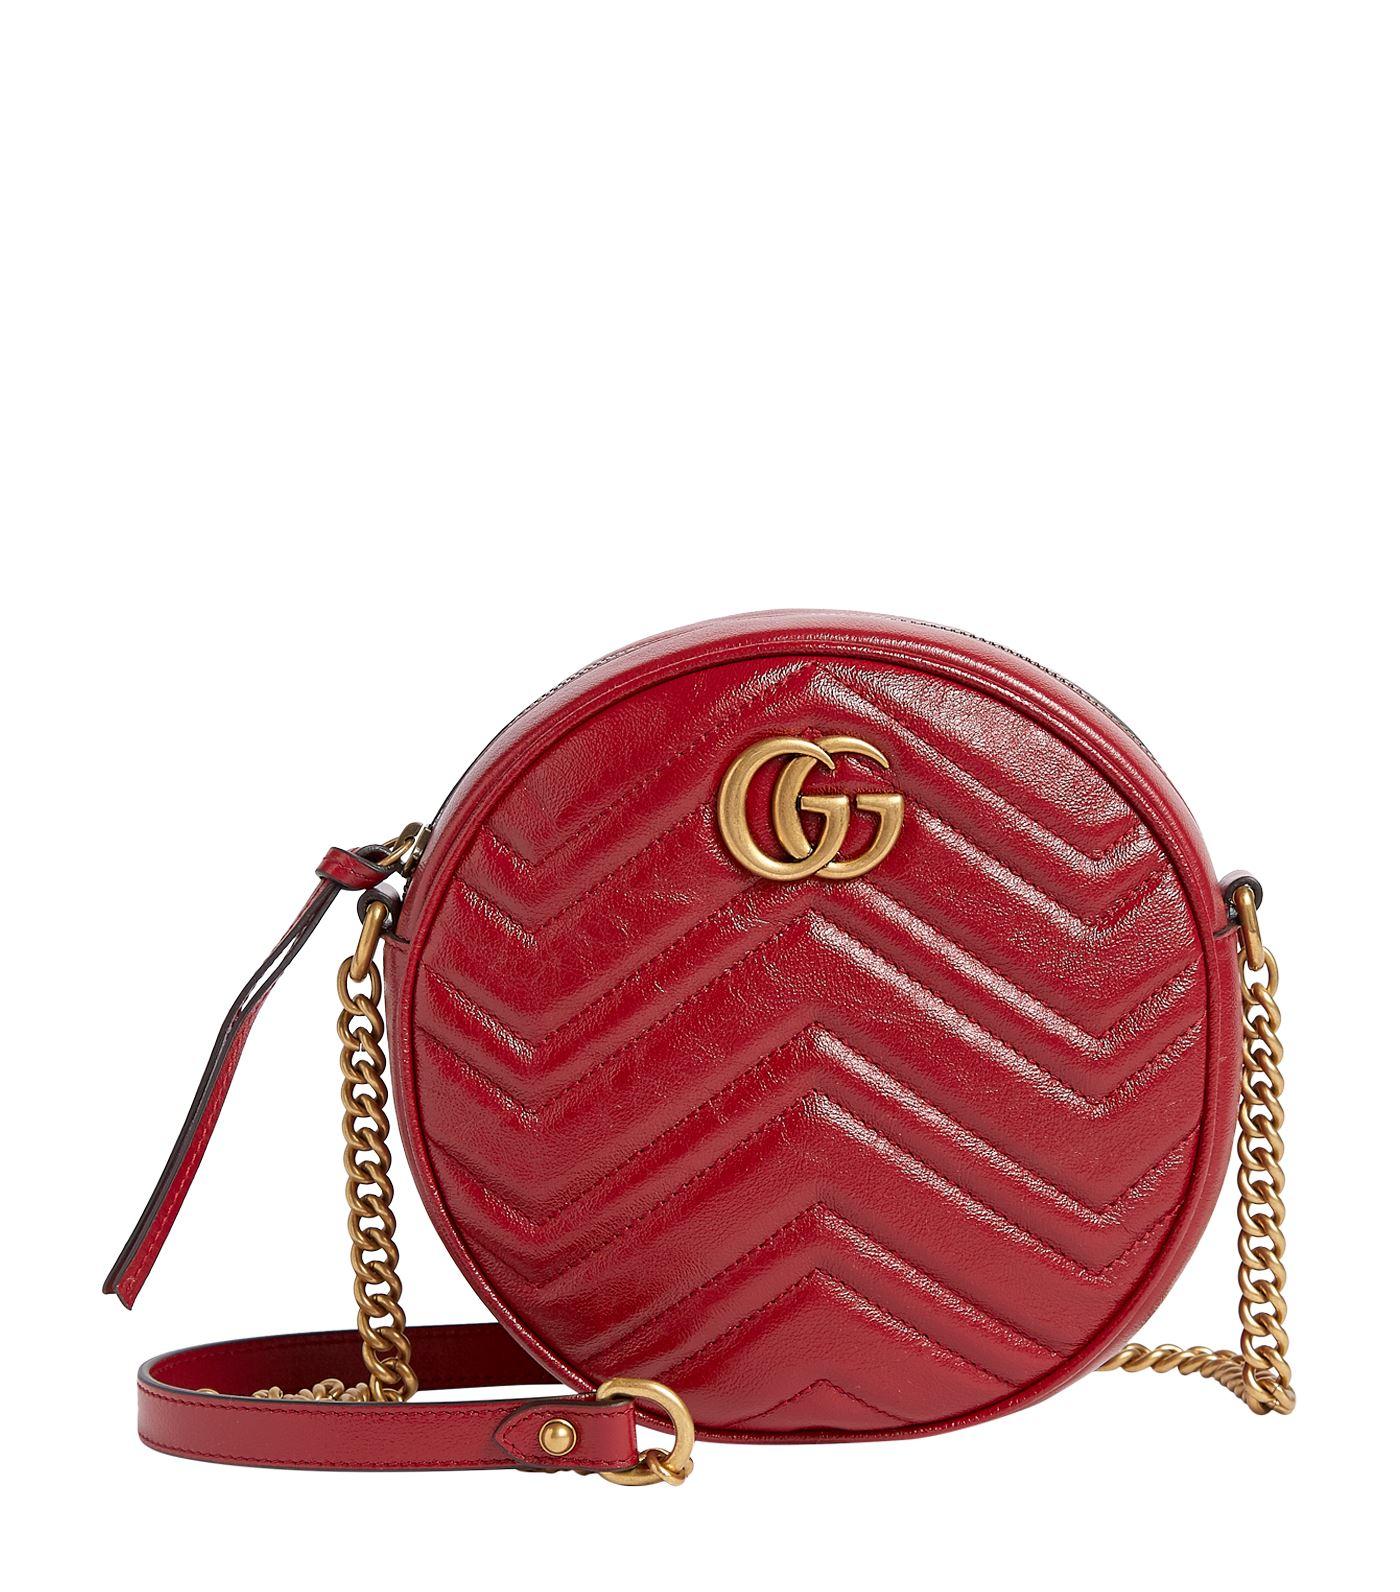 Gucci Leather Mini Round Marmont Matelass Shoulder Bag in Red - Lyst